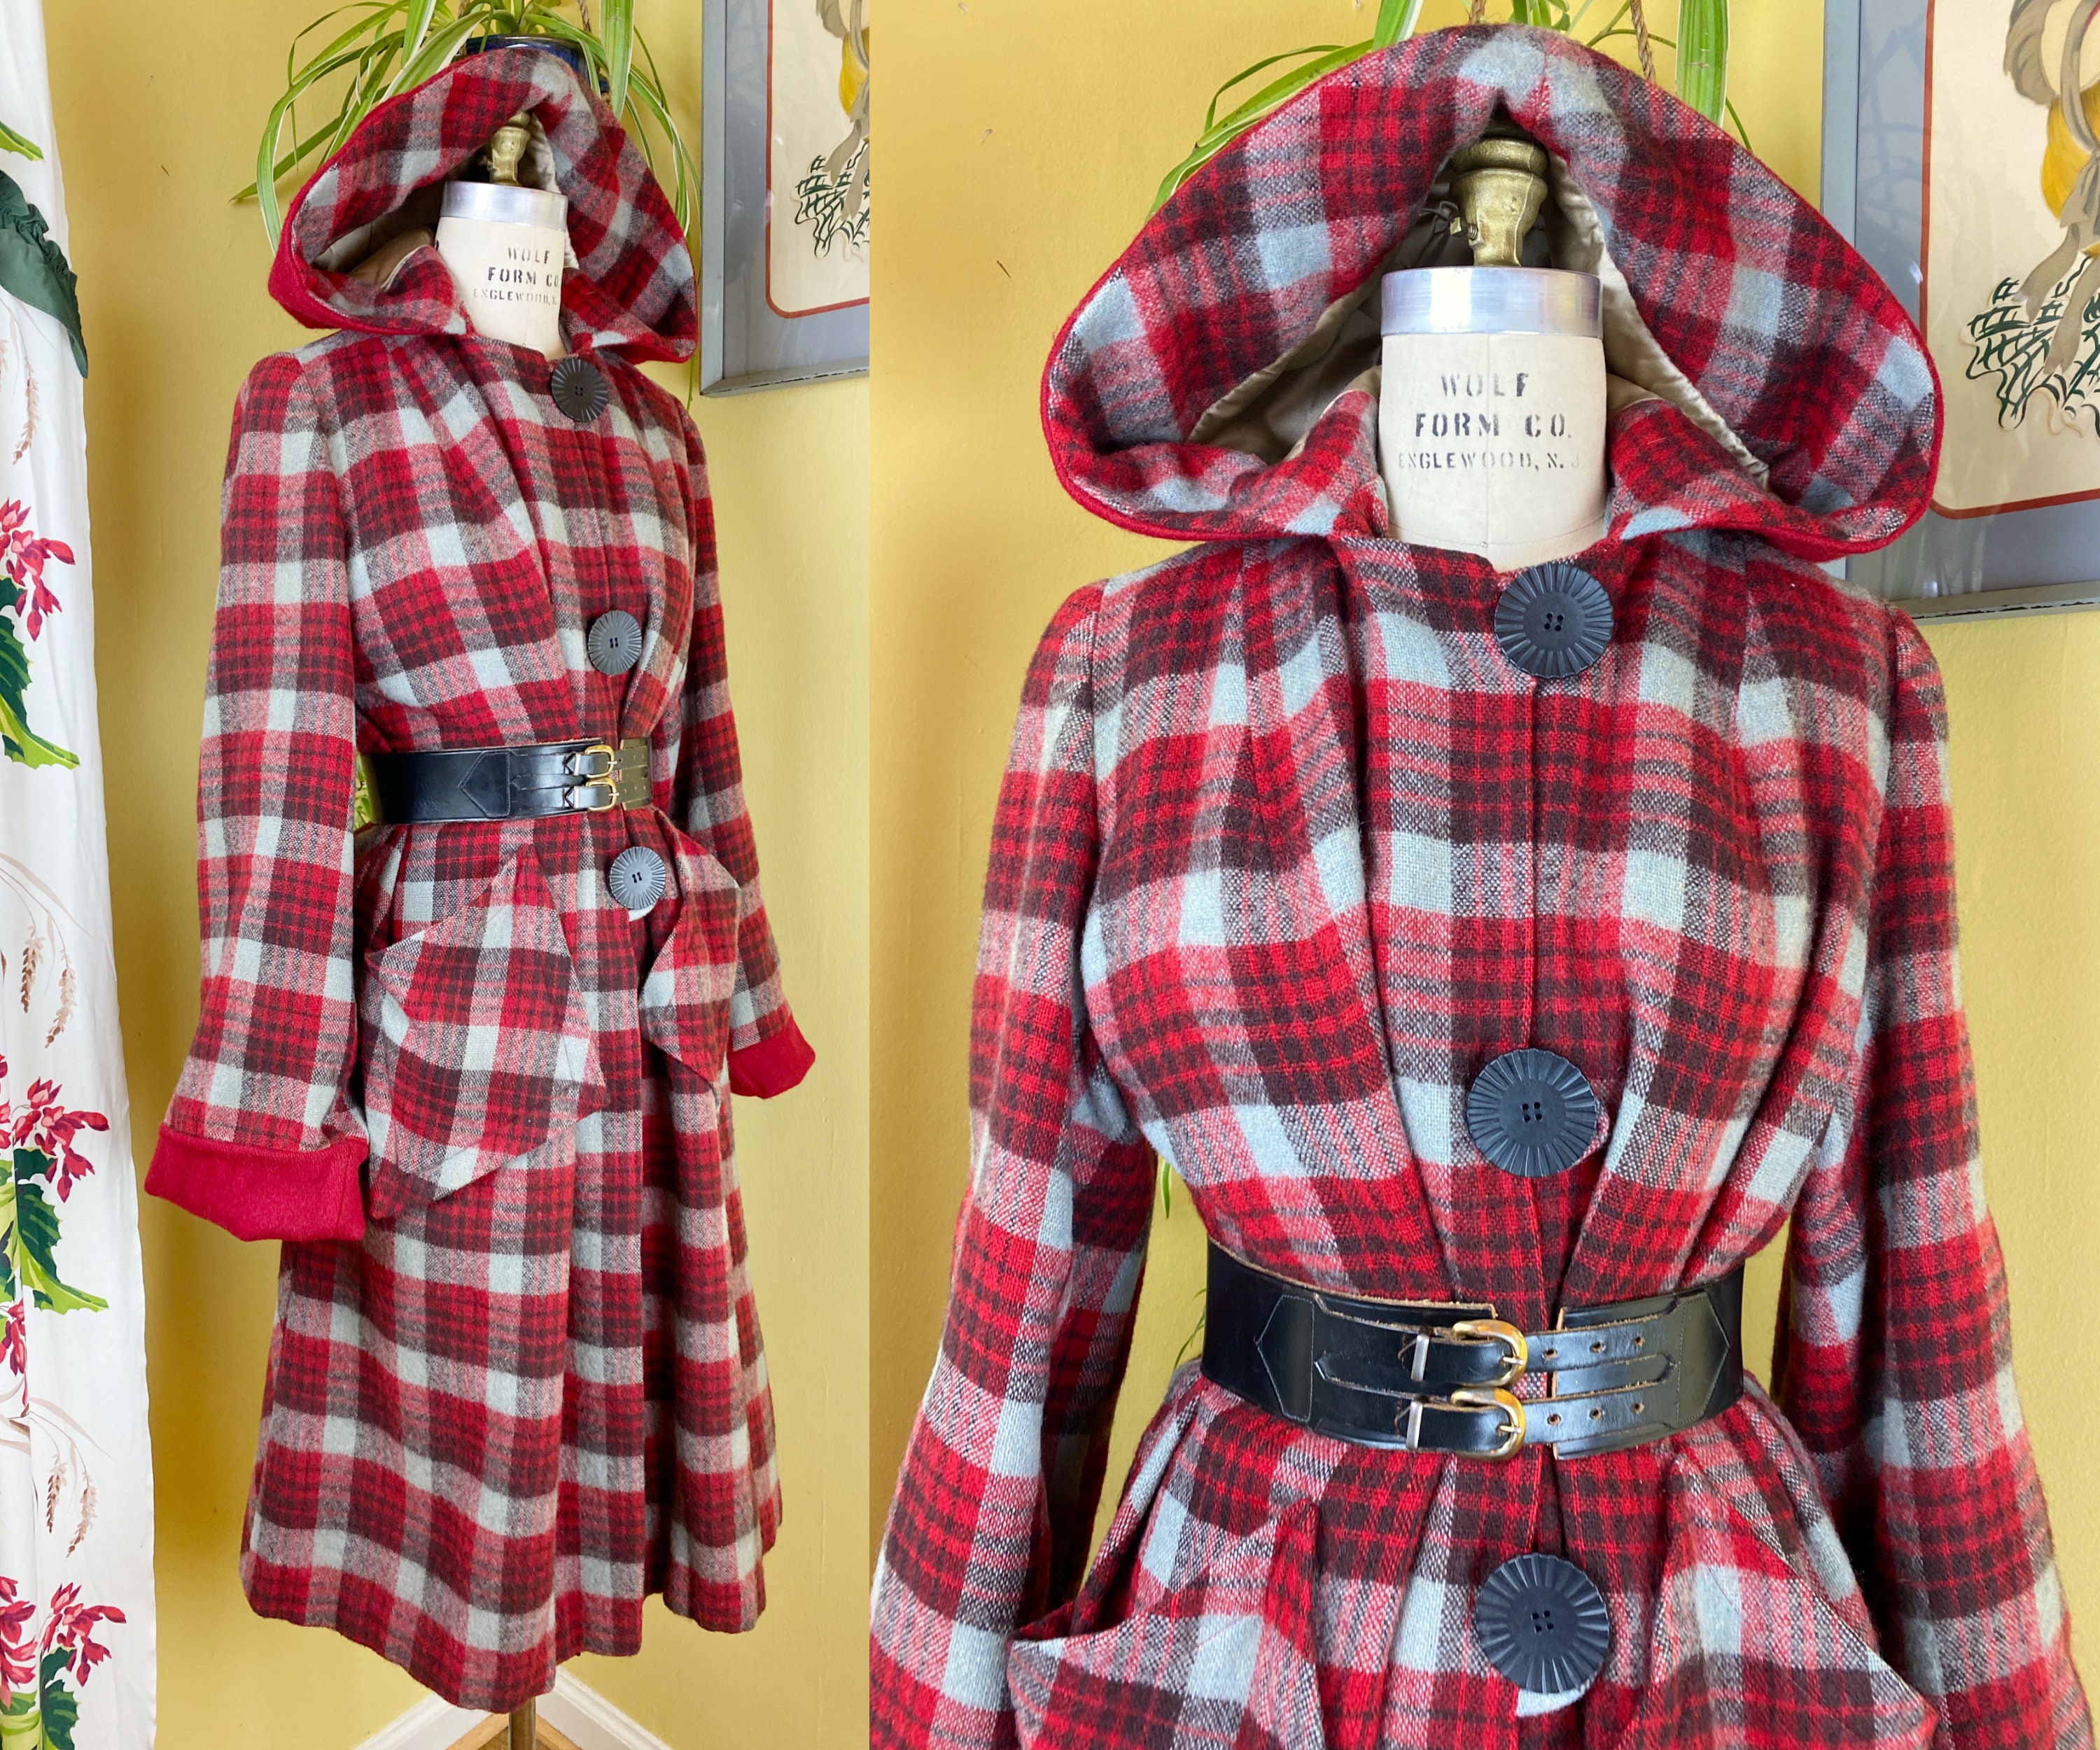 Real Vintage Search Engine Vintage 1940S Coat  Hooded Red  Grey Plaid Tartan Wool 40S - 50S Cusp Solid Hood Cuffs Gigantic Buttons Pockets $310.00 AT vintagedancer.com